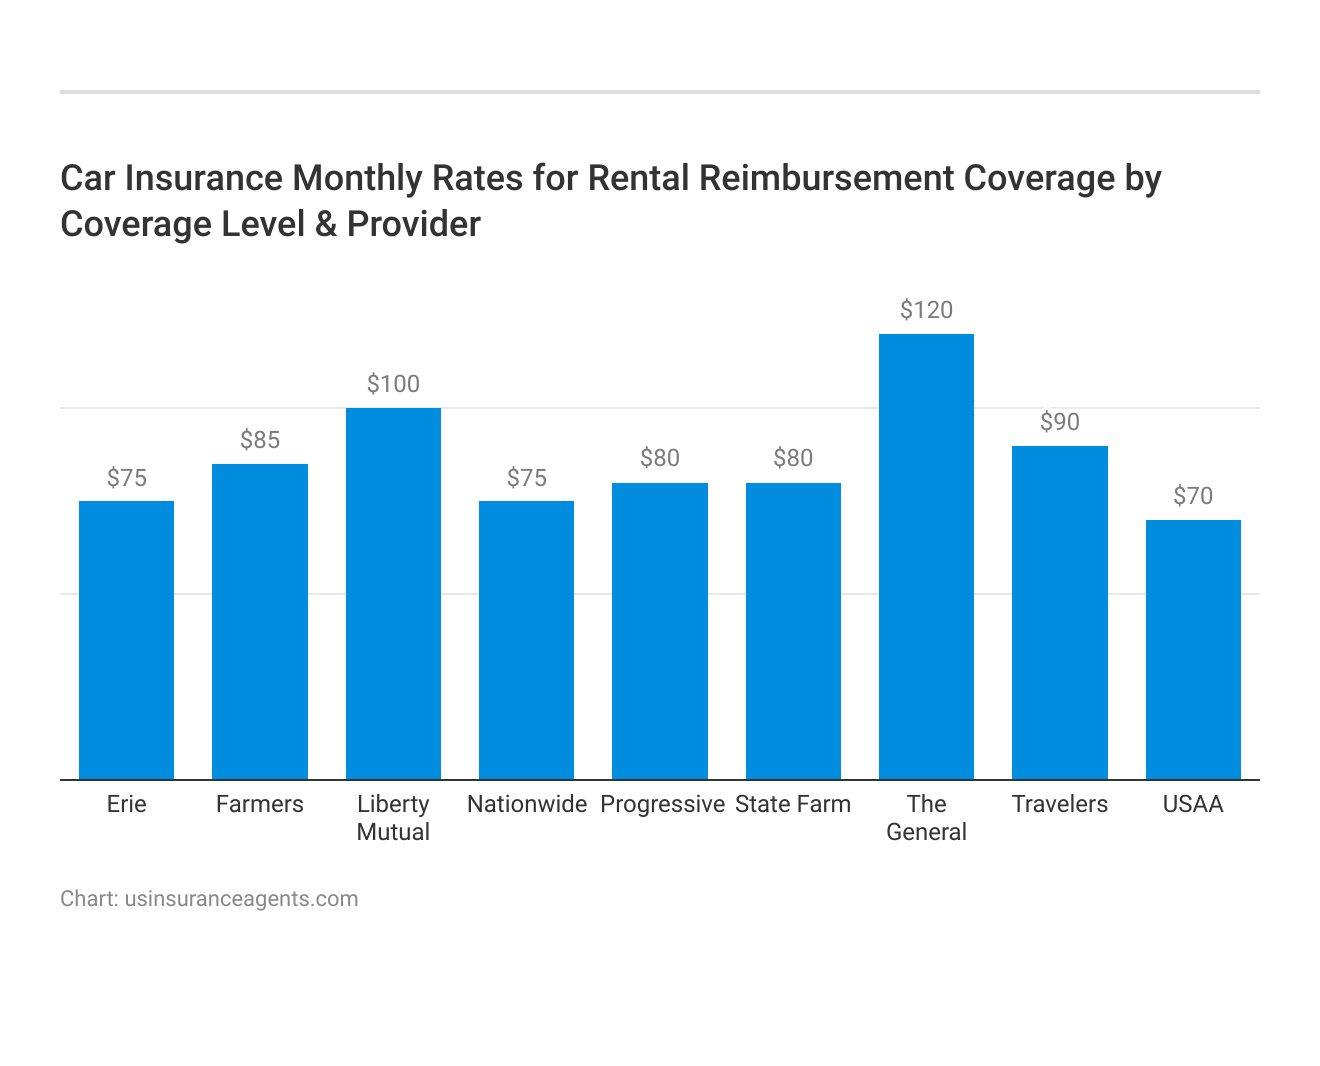 <h3>Car Insurance Monthly Rates for Rental Reimbursement Coverage by Coverage Level & Provider</h3>